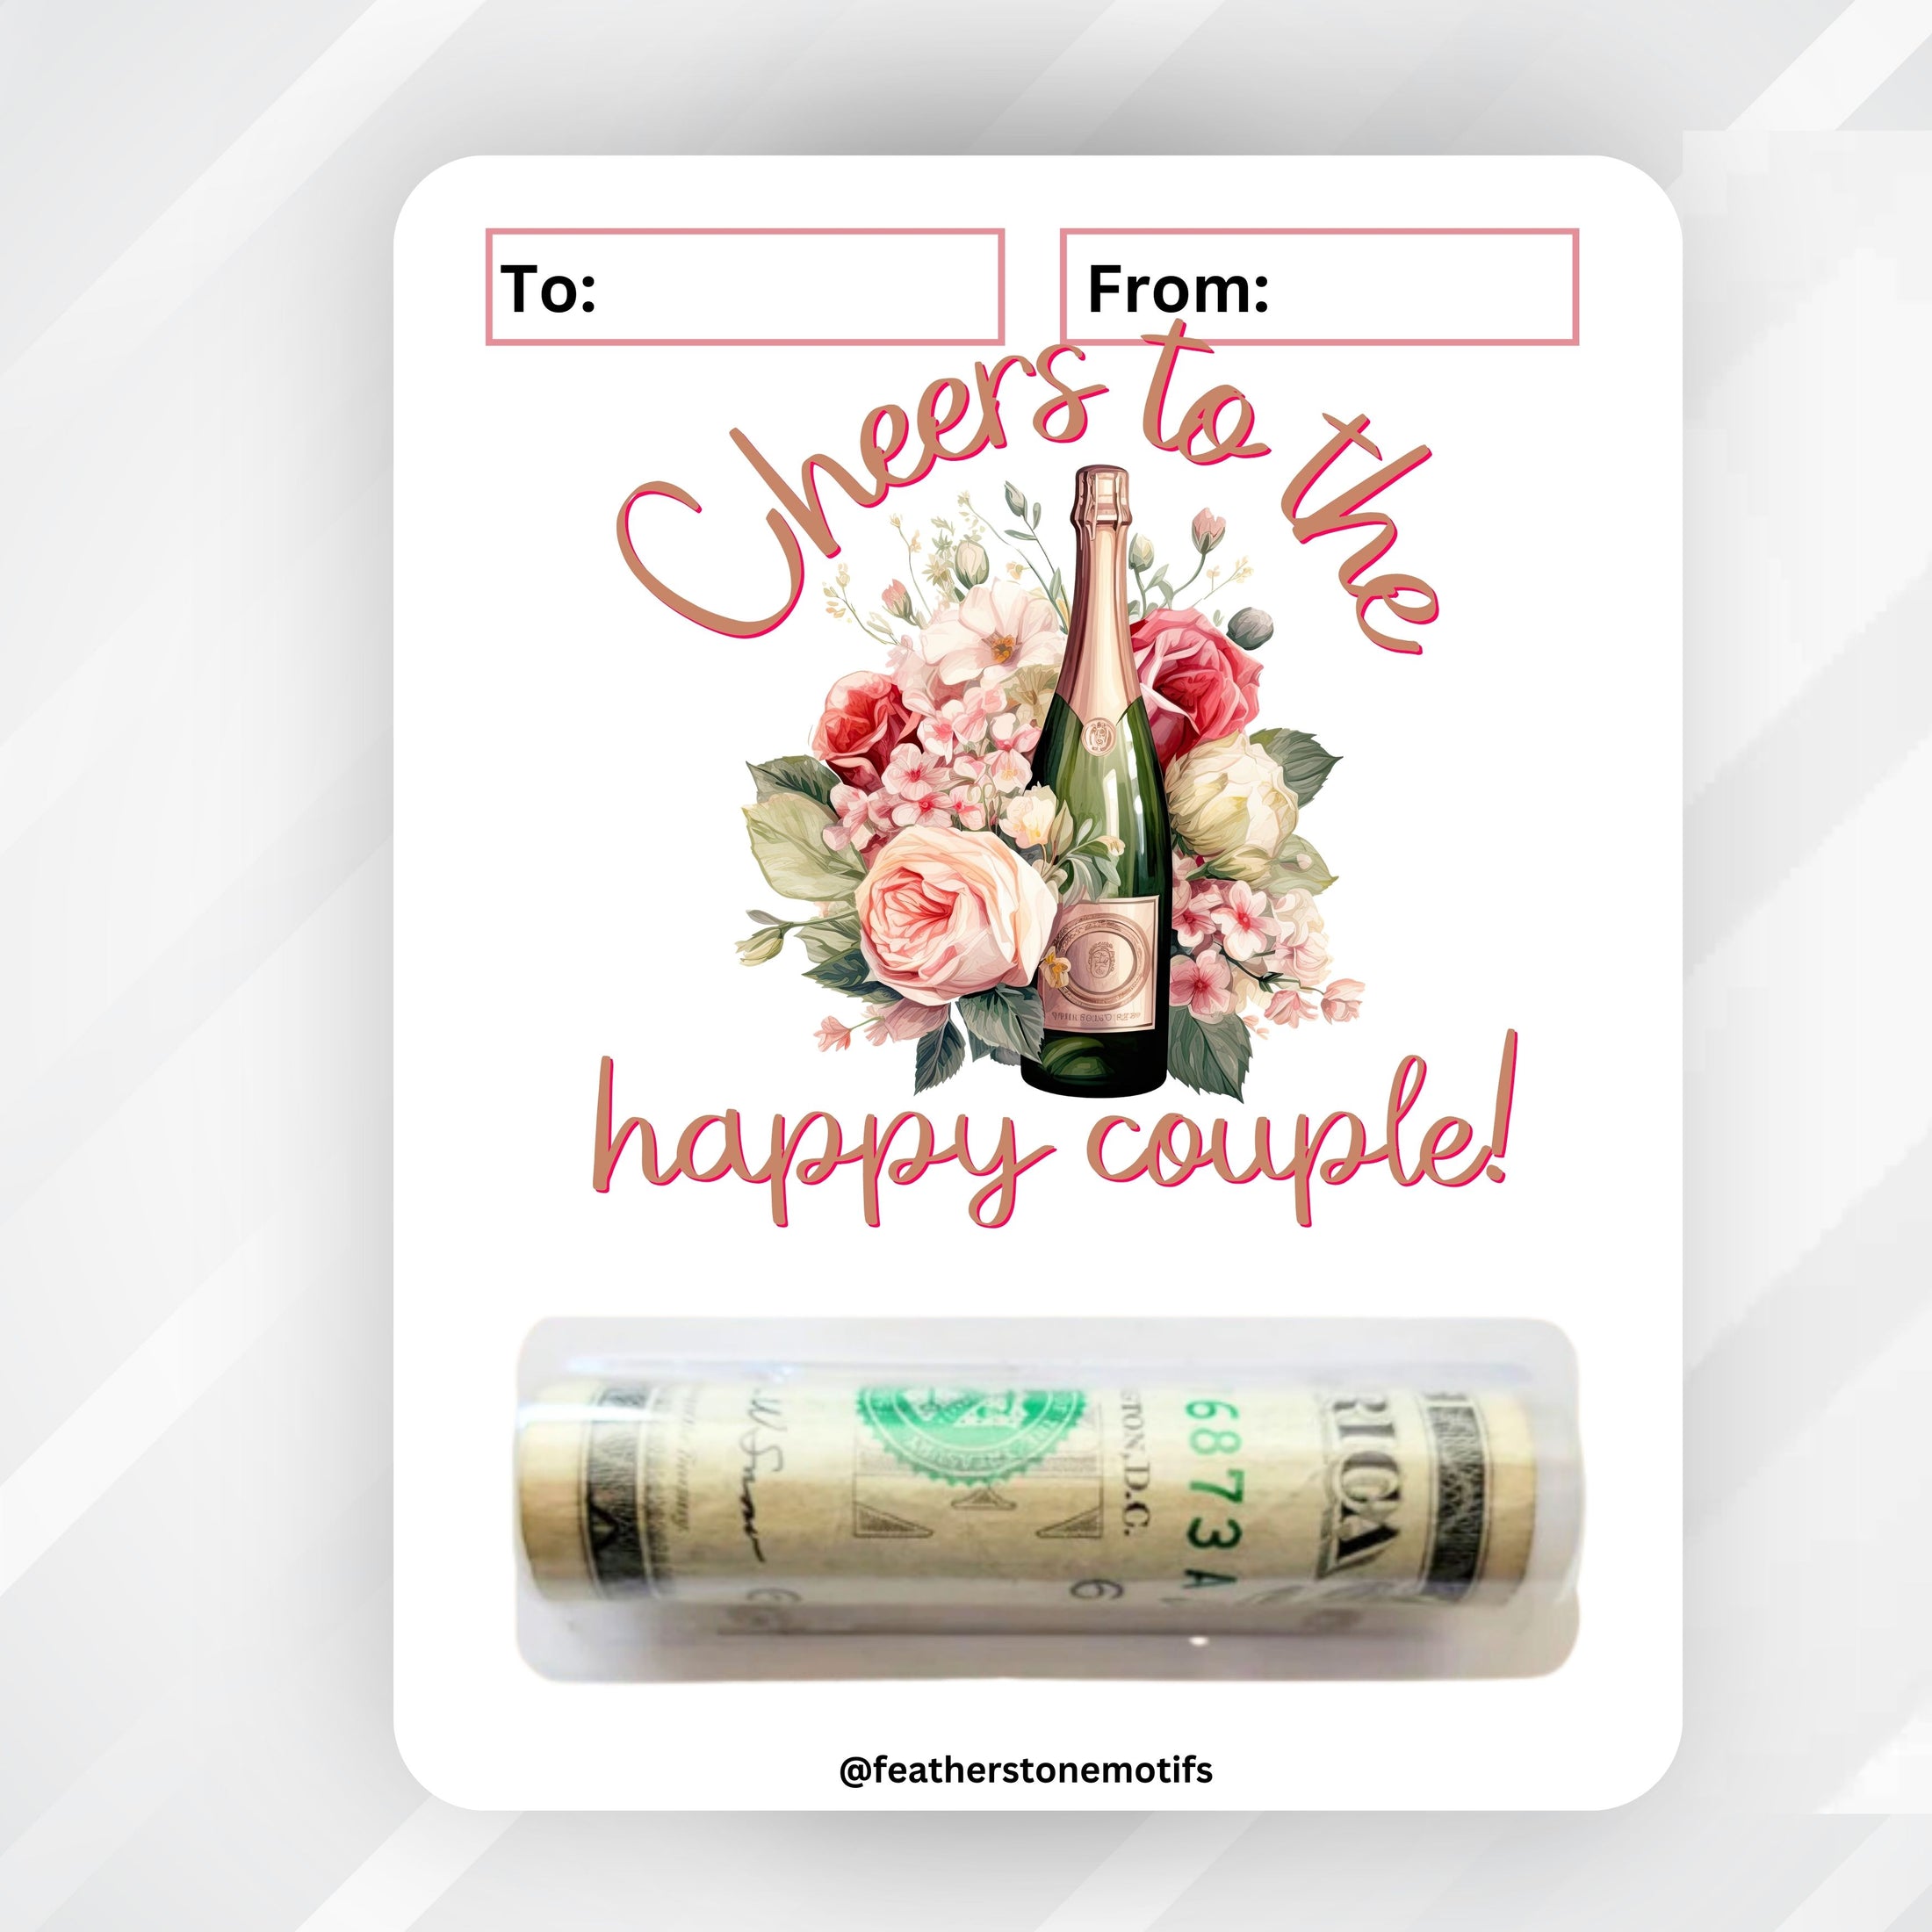 This image shows the money tube attached to the Cheers to the Happy Couple Money Card.